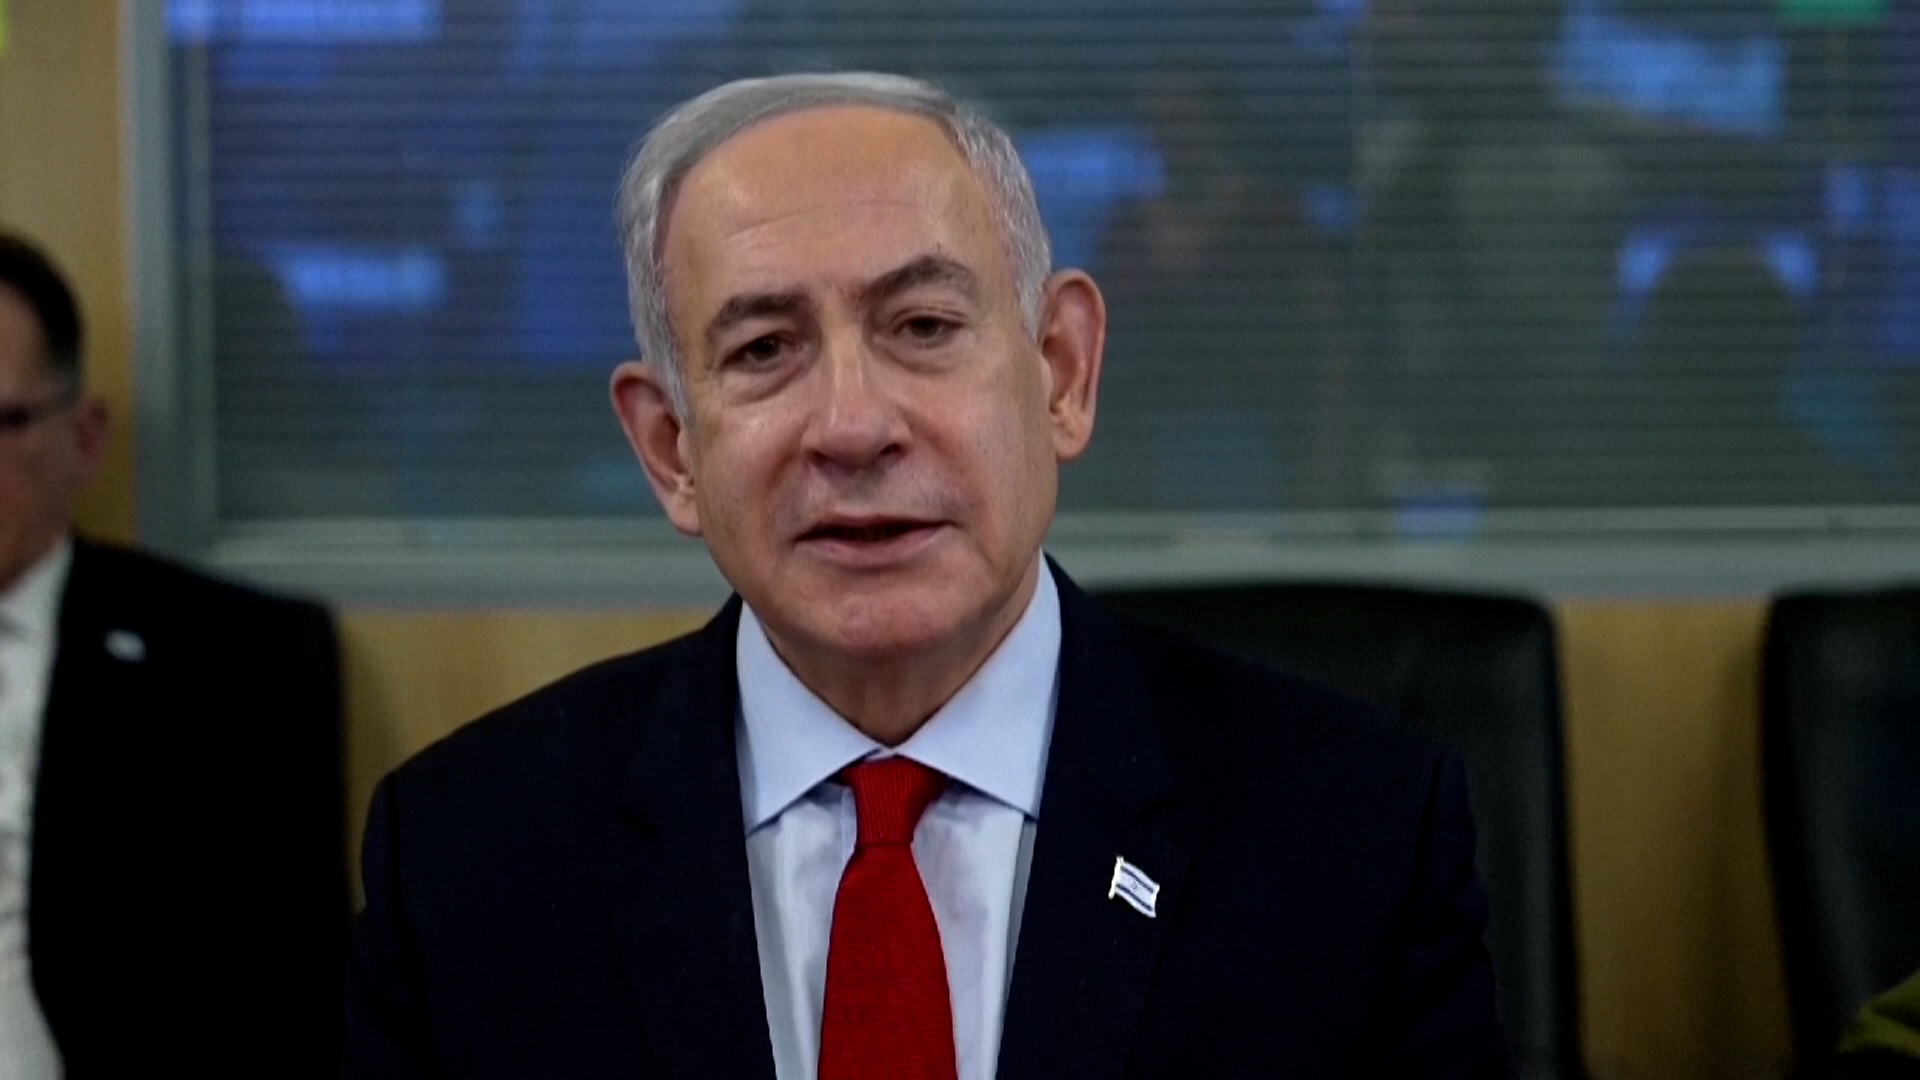 Whoever harms us is marked for death, Israeli PM warns Hezbollah | Hezbollah [Video]